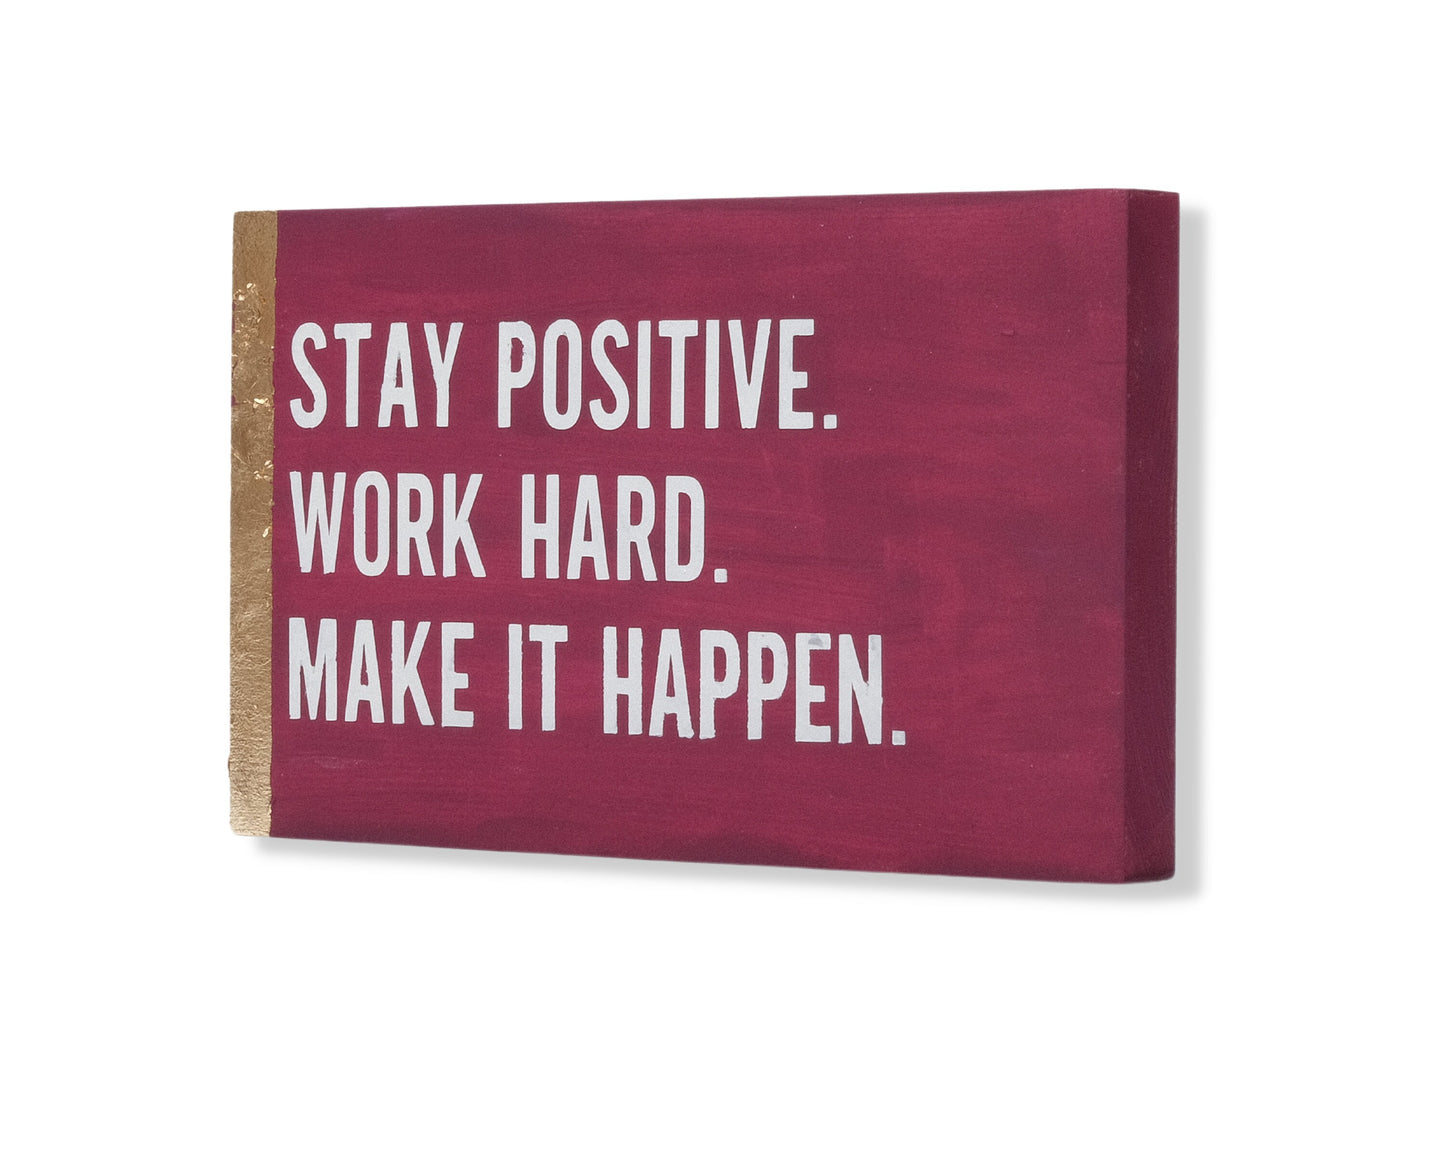 Stay Positive, Work Hard, Make it Happen, custom wood block sign, inspirational quote, self care home decor, gift for her, gift for him